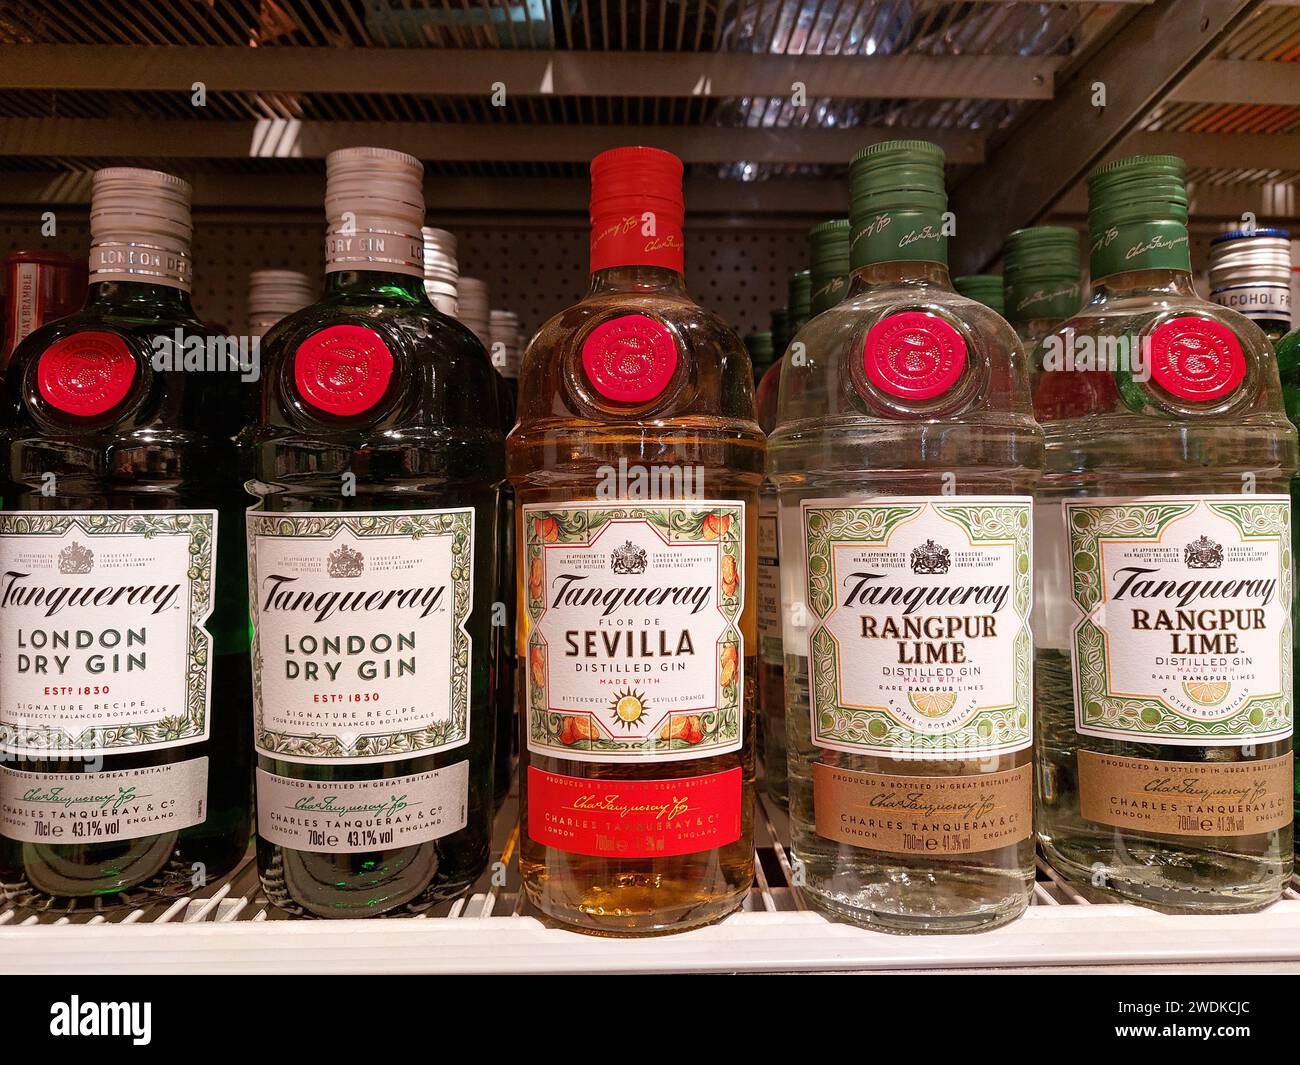 Tanquerey Gin Bottles in a supermarket Stock Photo